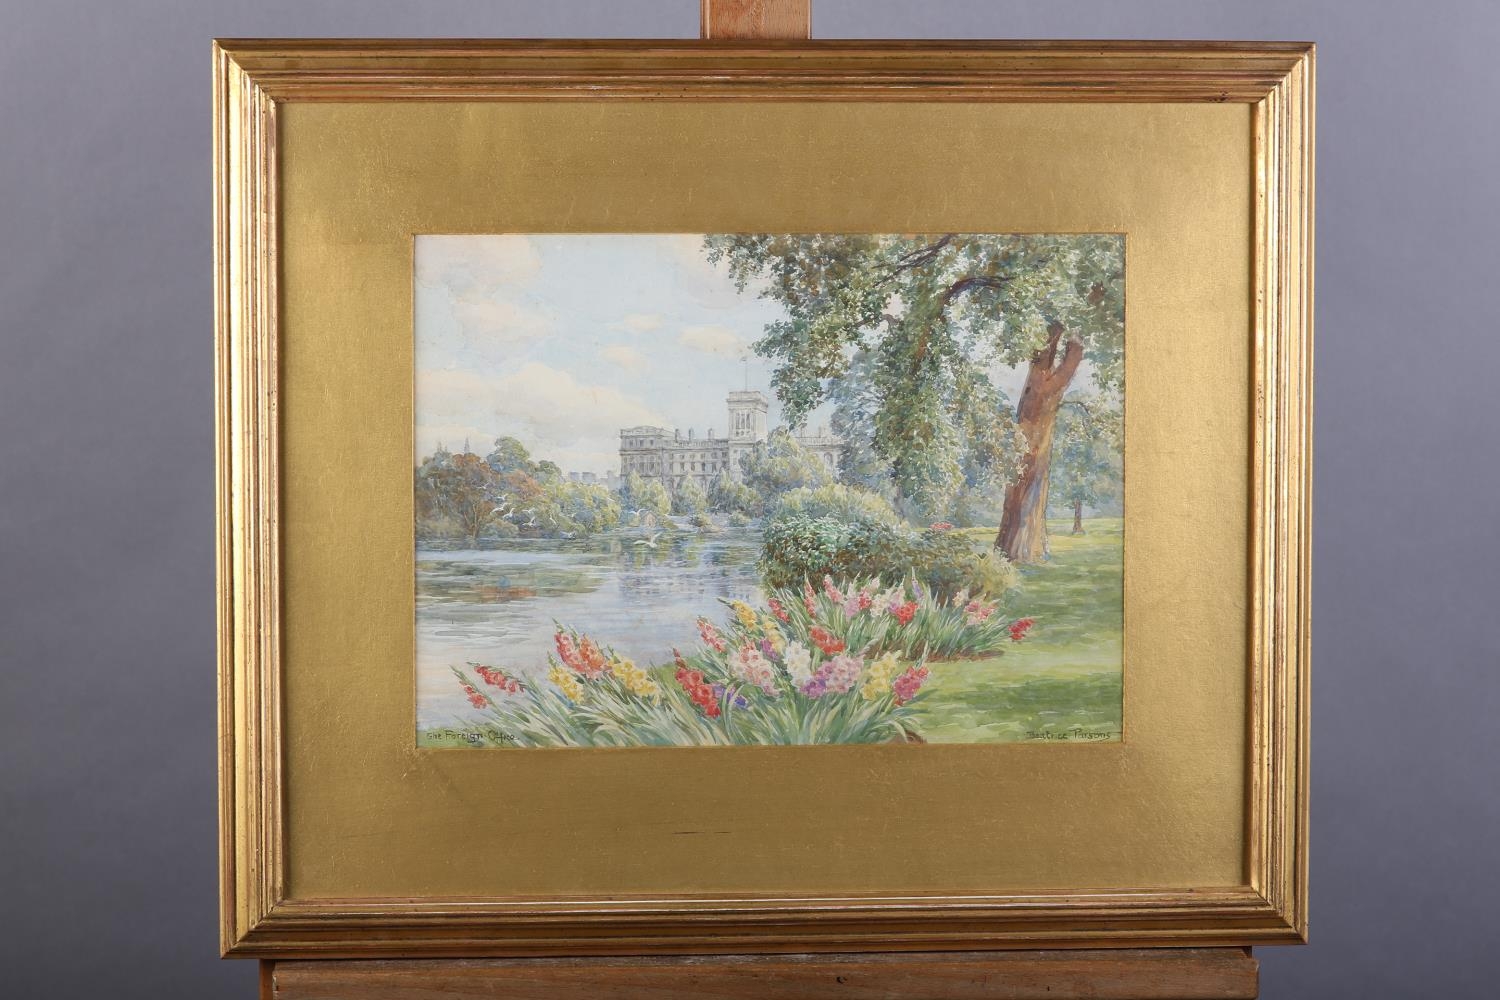 ARR BEATRICE PARSONS RA (1870-1955), 'The Foreign Office', St James's Park with iris, watercolour, - Image 2 of 5